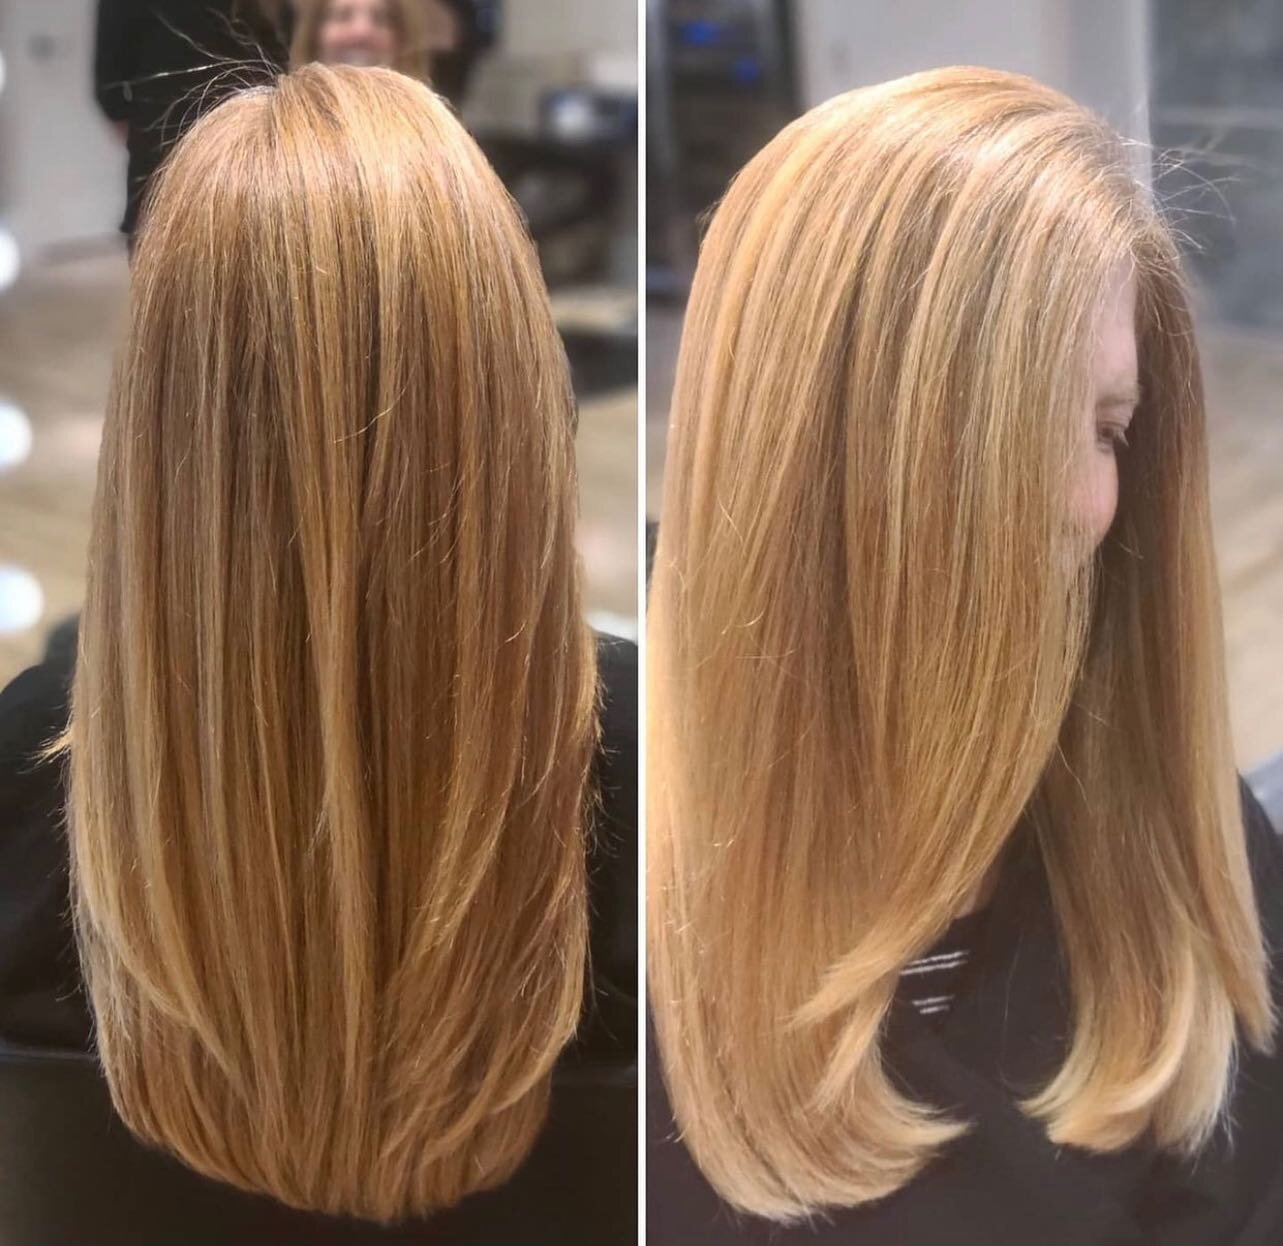 Treat yourself to smooth silky hair ✨ 

Freshen up your look by calling us at (239)597-7005 and book your hair appointment today! ☎️ &nbsp;#ncolorsalon#elevatedexperience